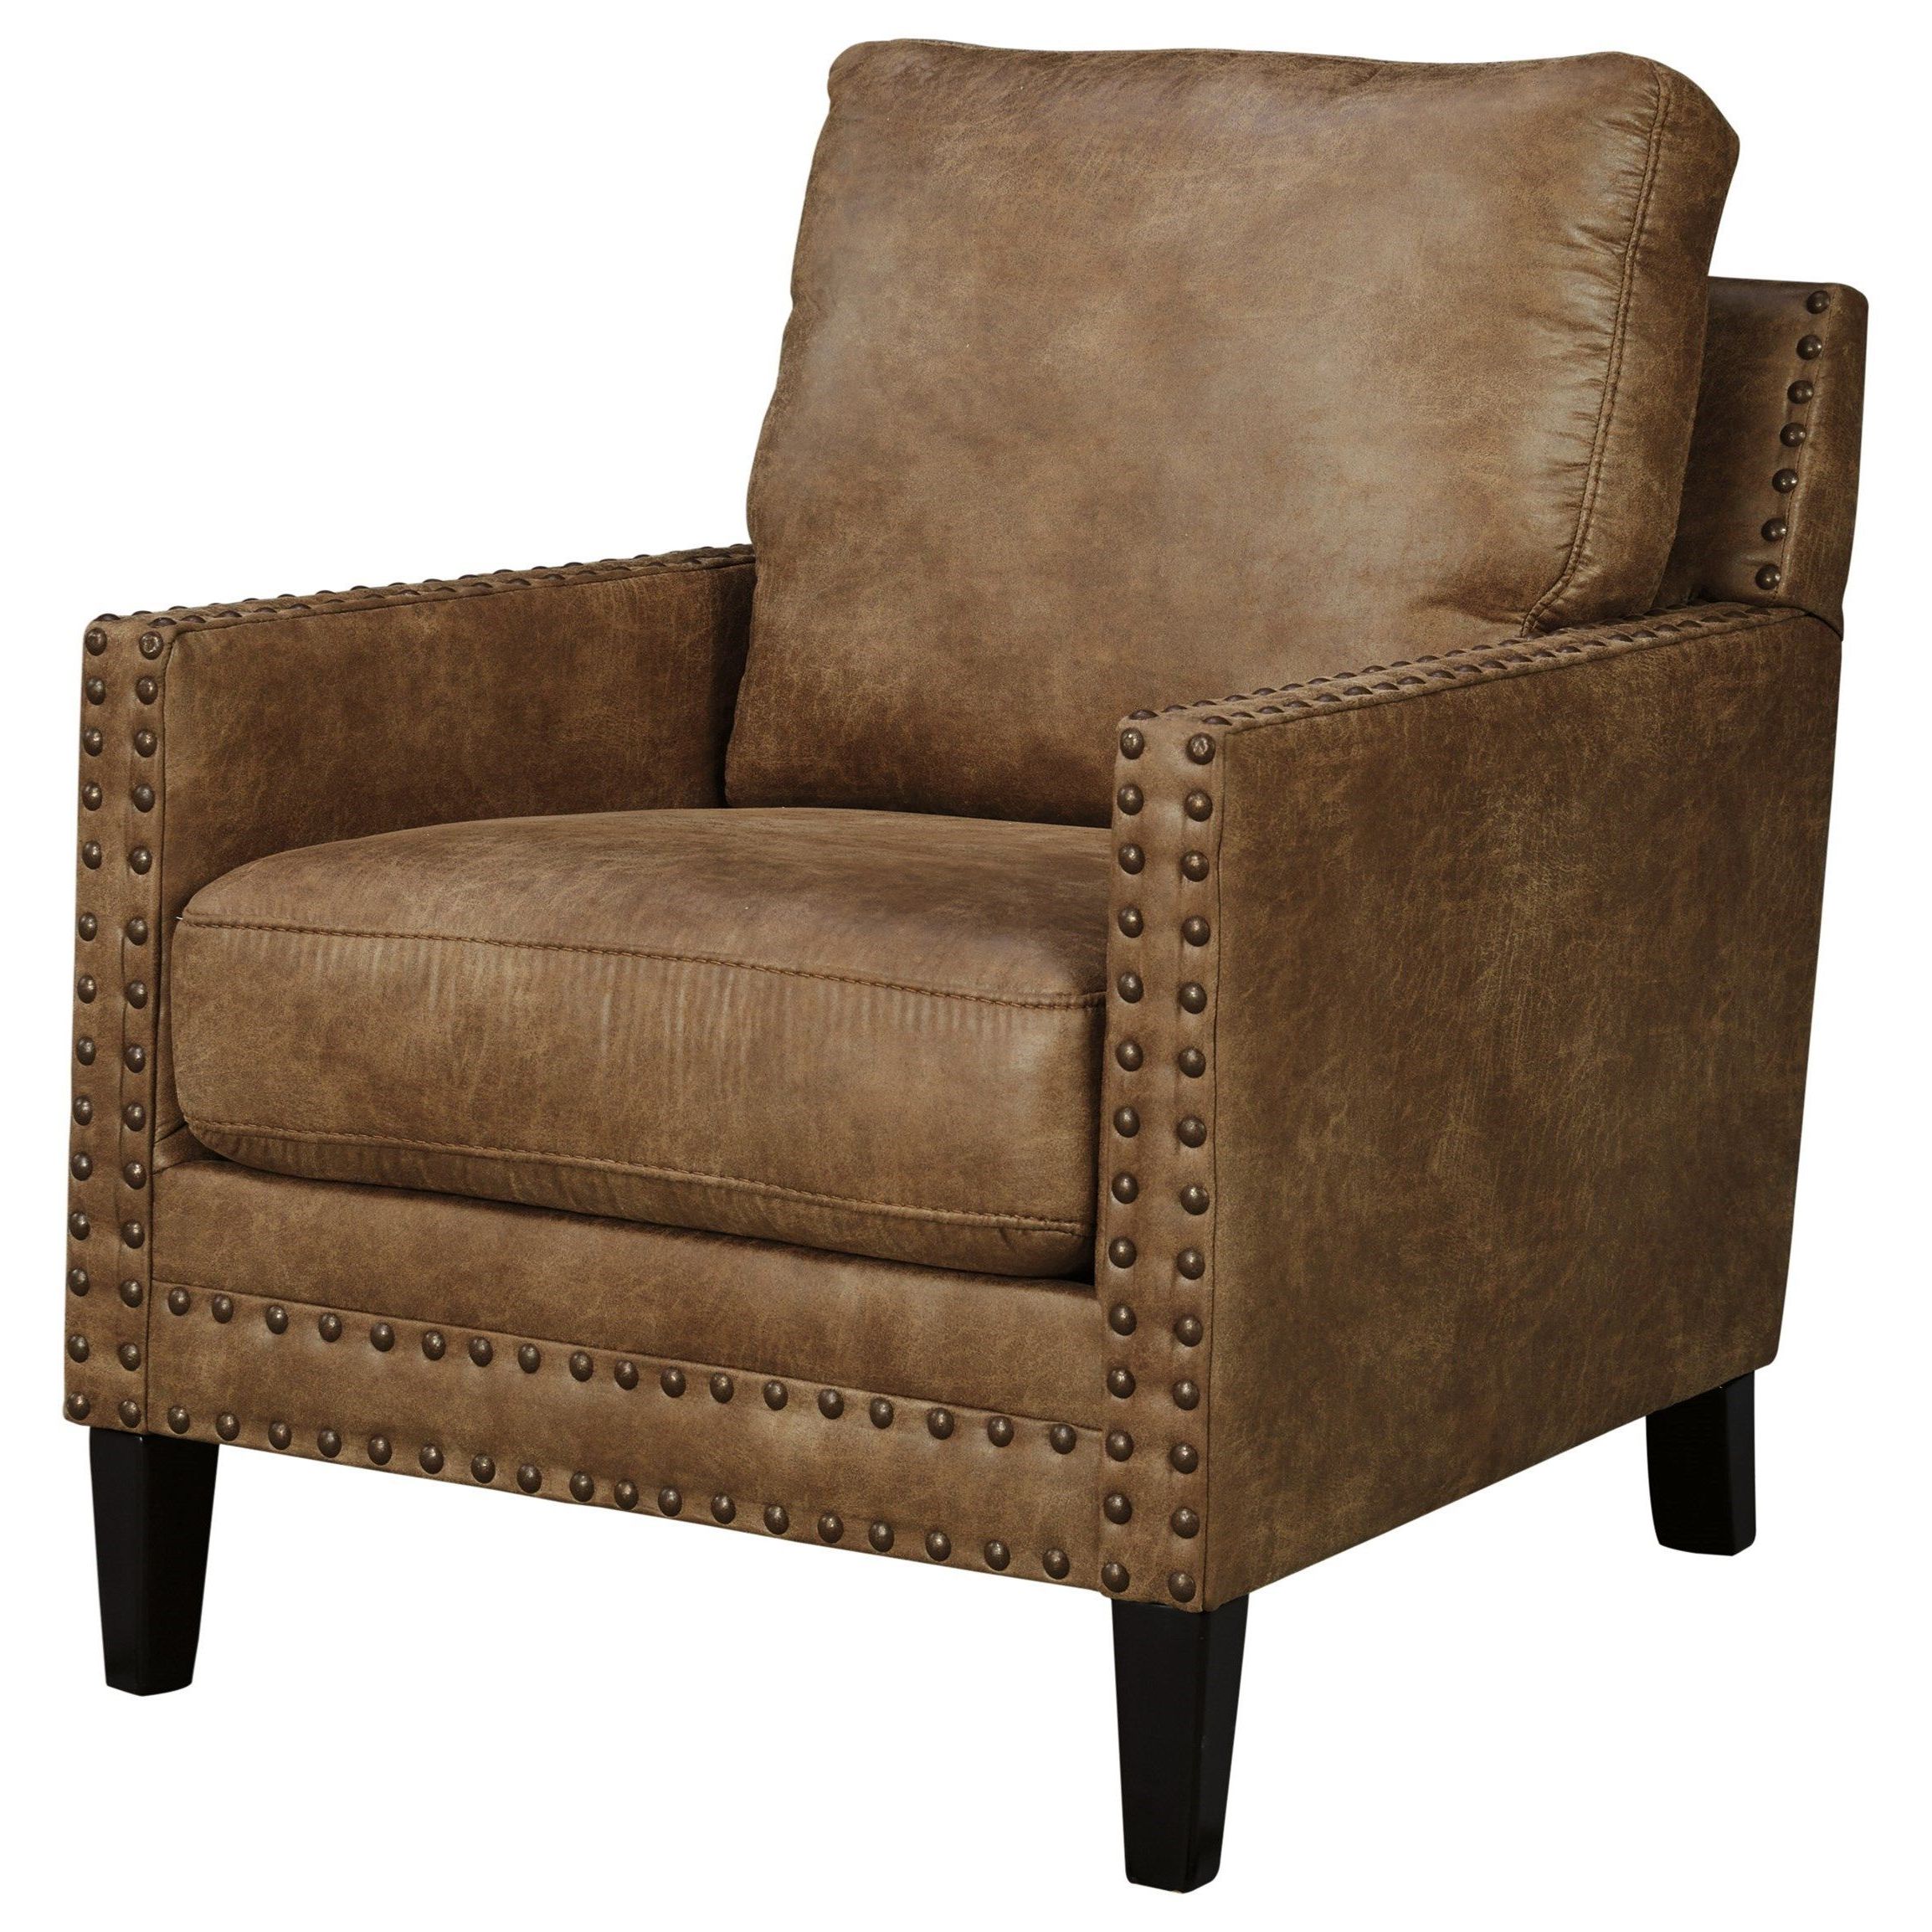 Malakoff Contemporary Nailhead Trim Chair With Track Arms Regarding Recent Aidan Ii Swivel Accent Chairs (View 18 of 20)